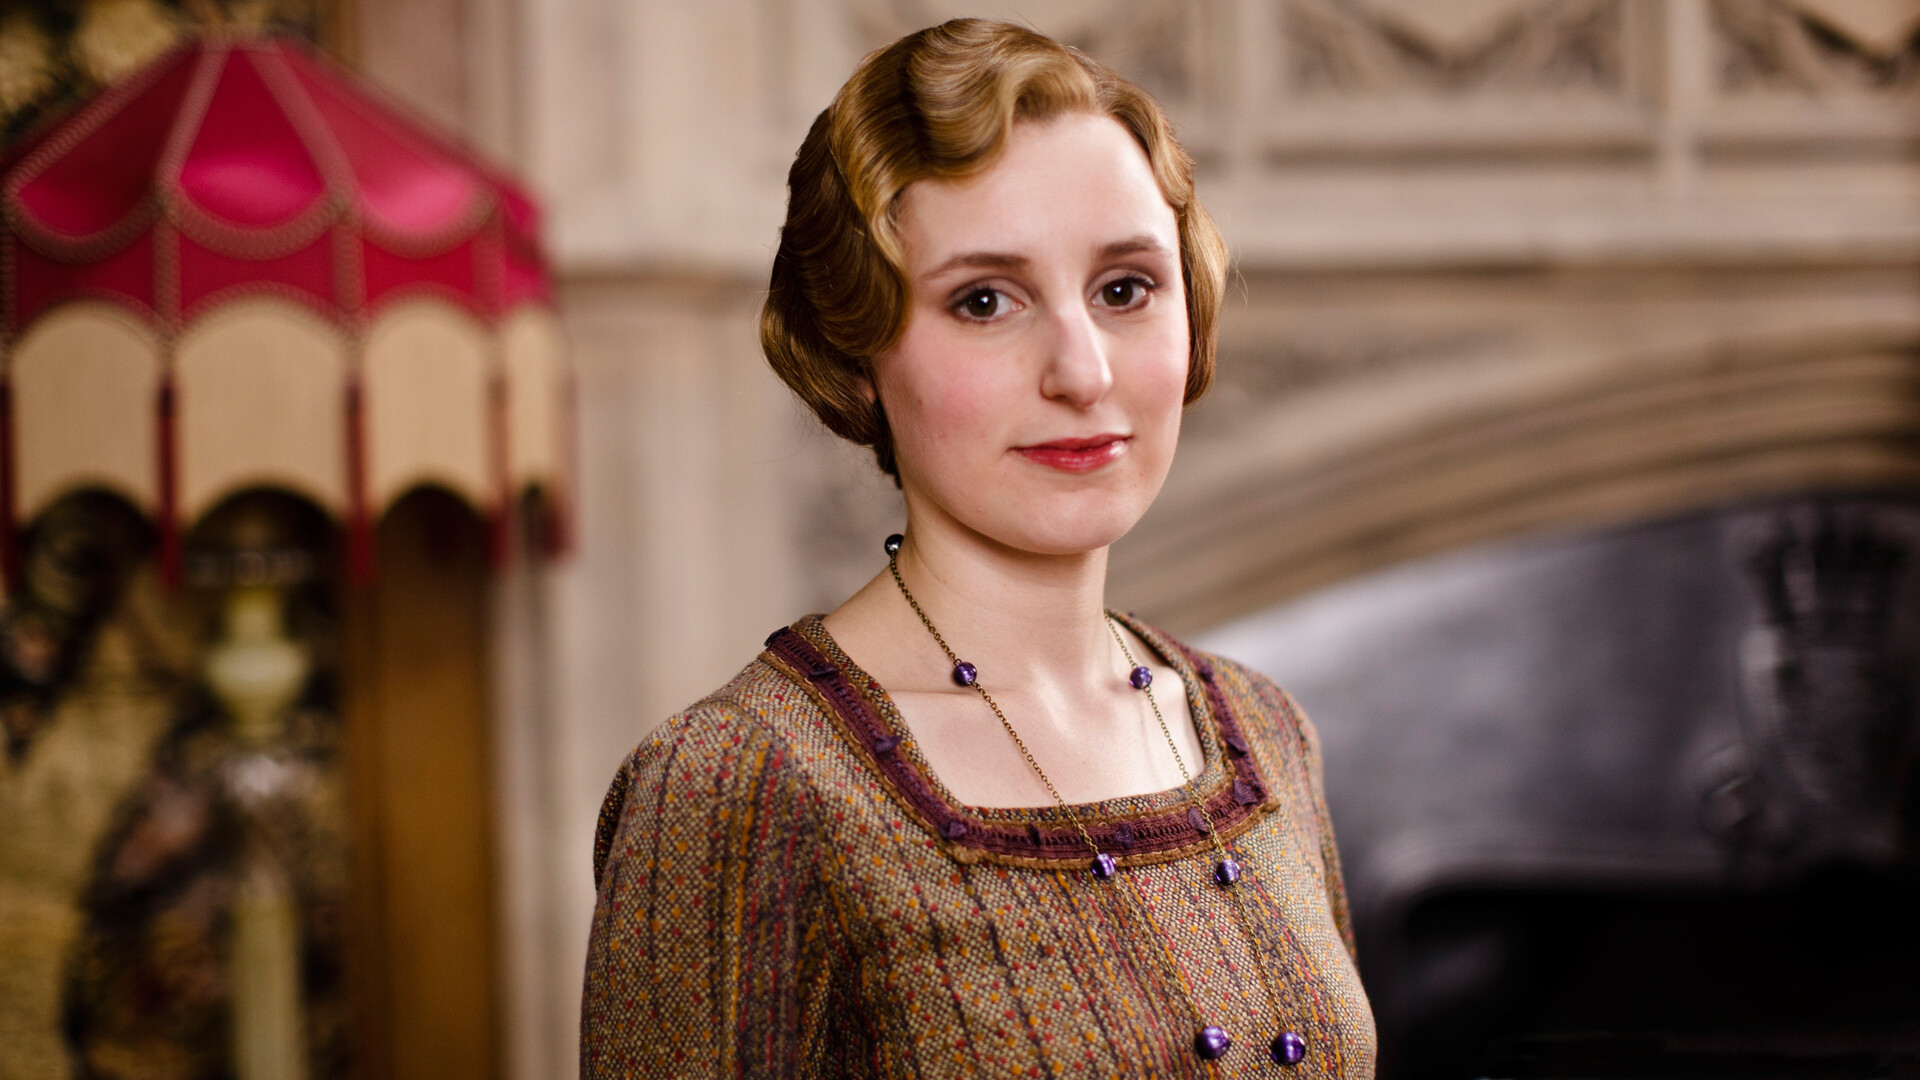 Downton Abbey: Laura Carmichael as Edith Pelham, the middle daughter of Lord and Lady Grantham. 1920x1080 Full HD Wallpaper.